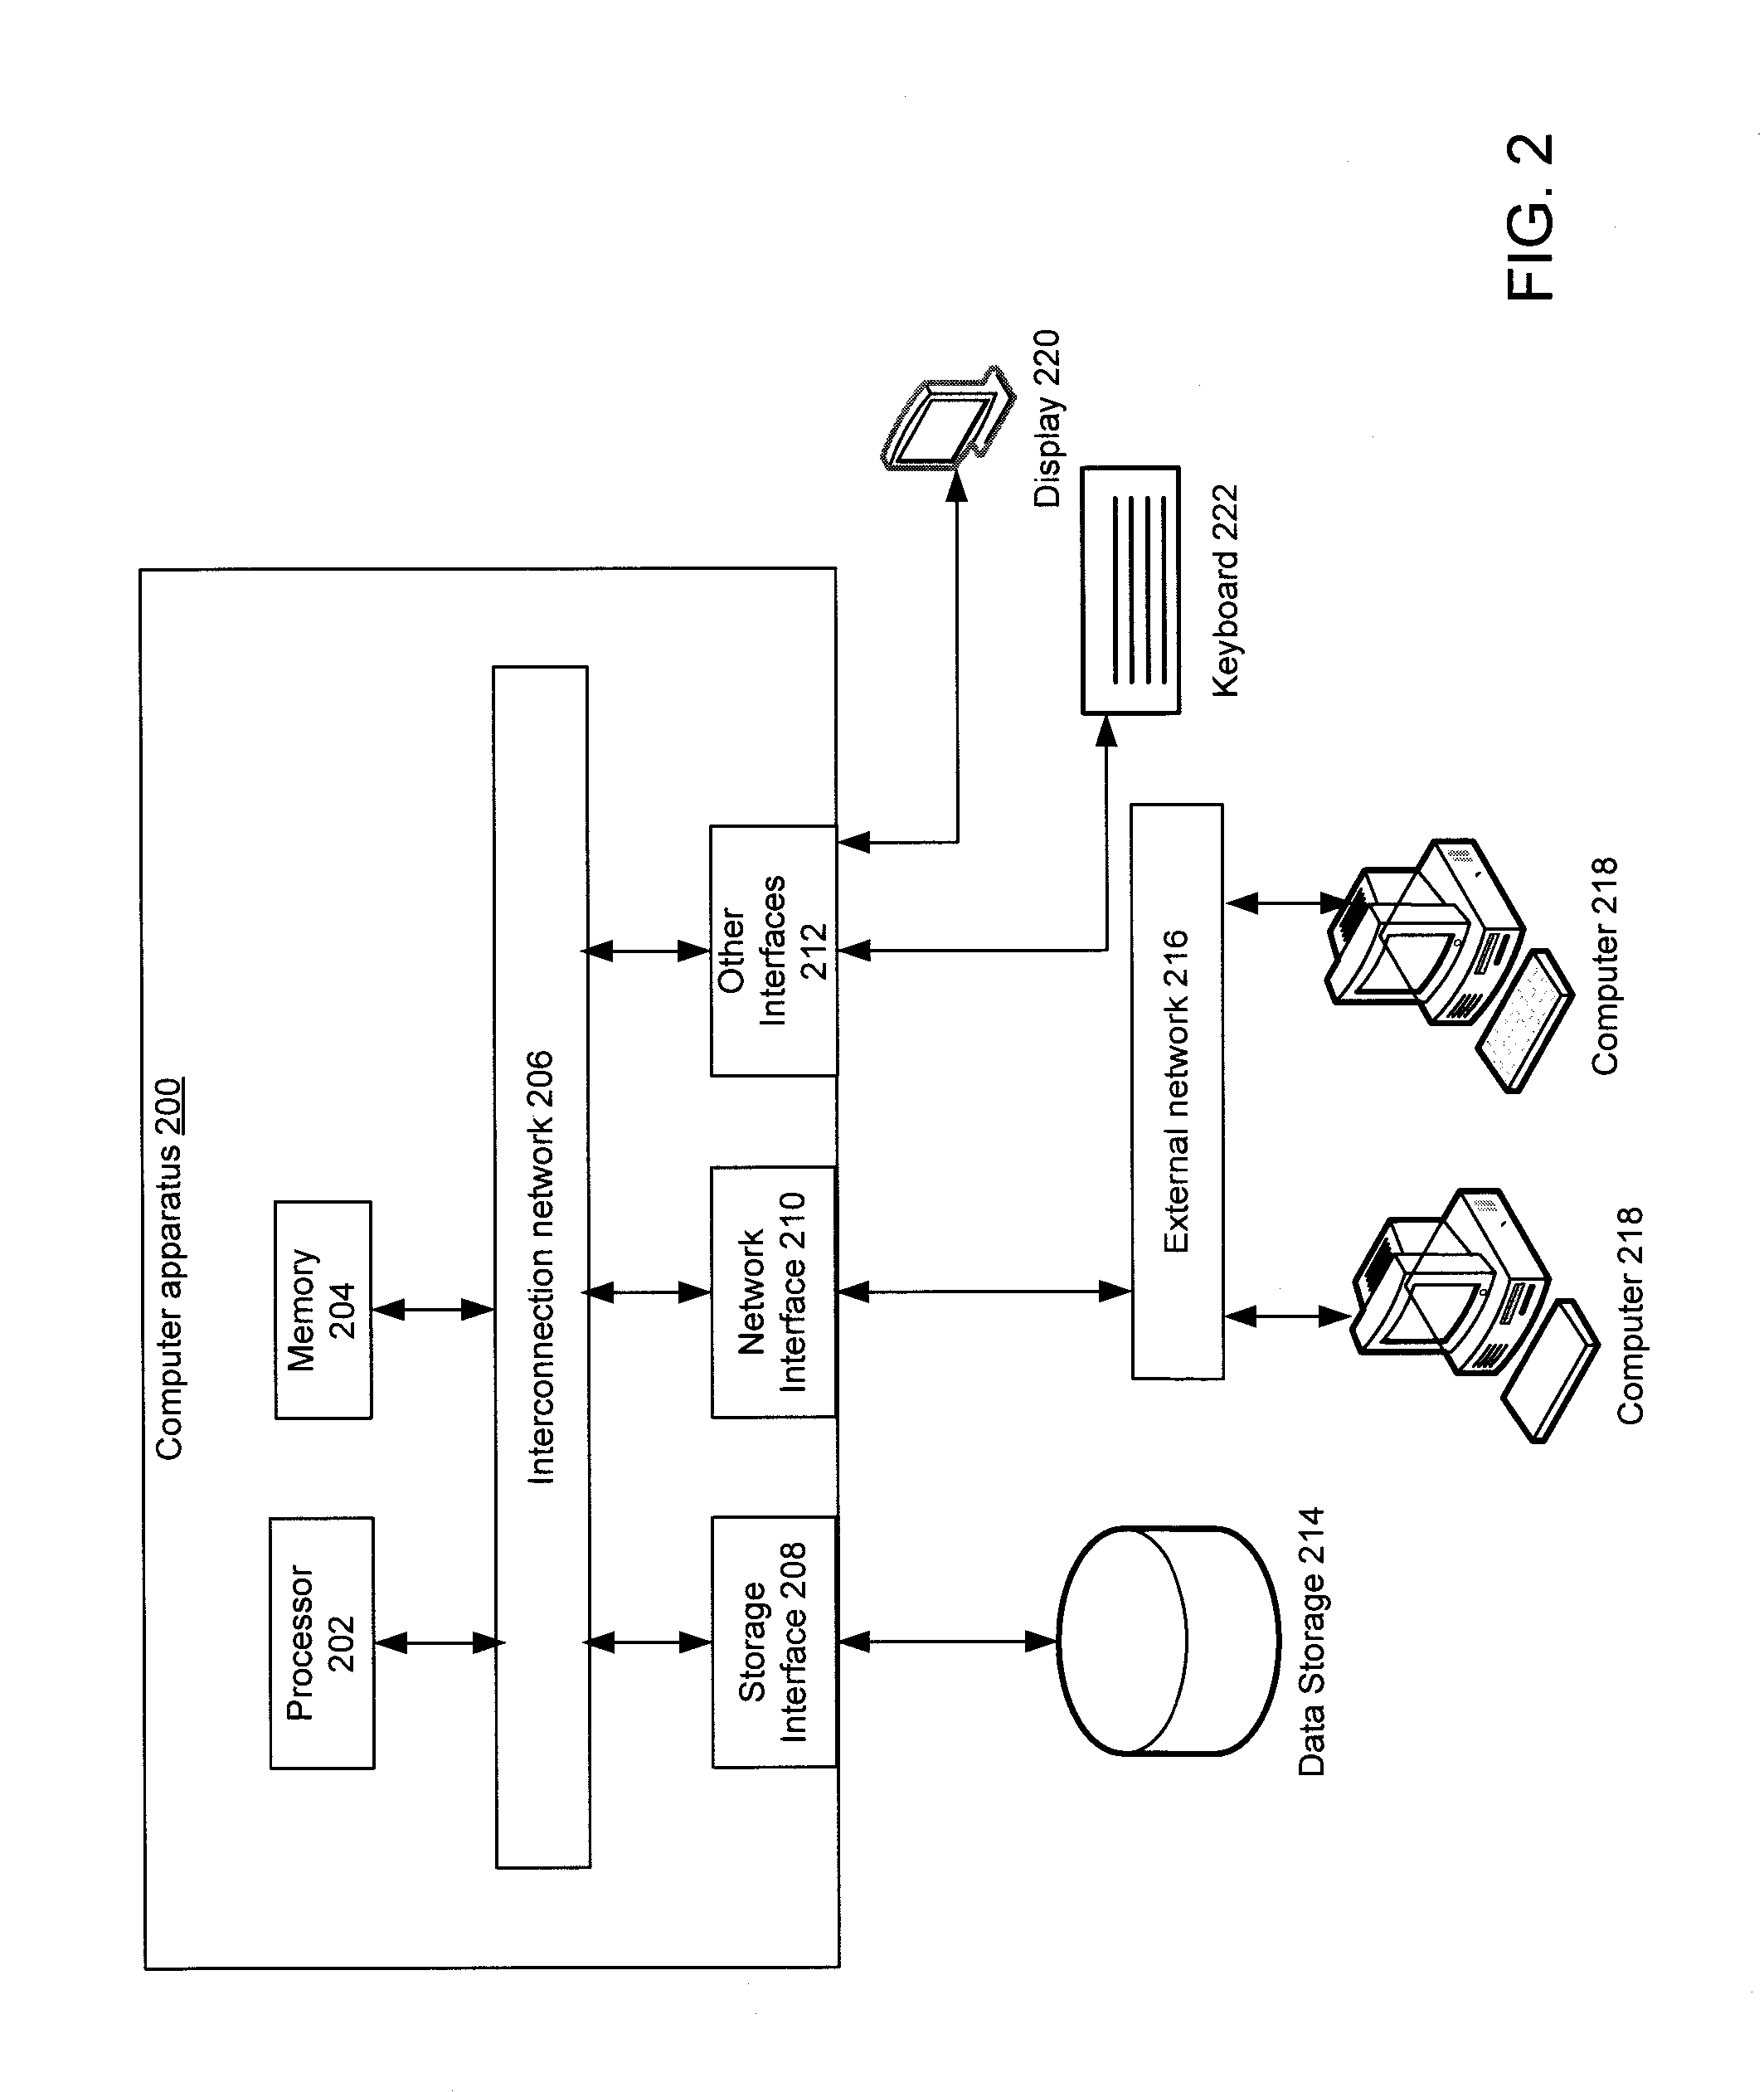 Methods and apparatus for content fingerprinting for information leakage prevention